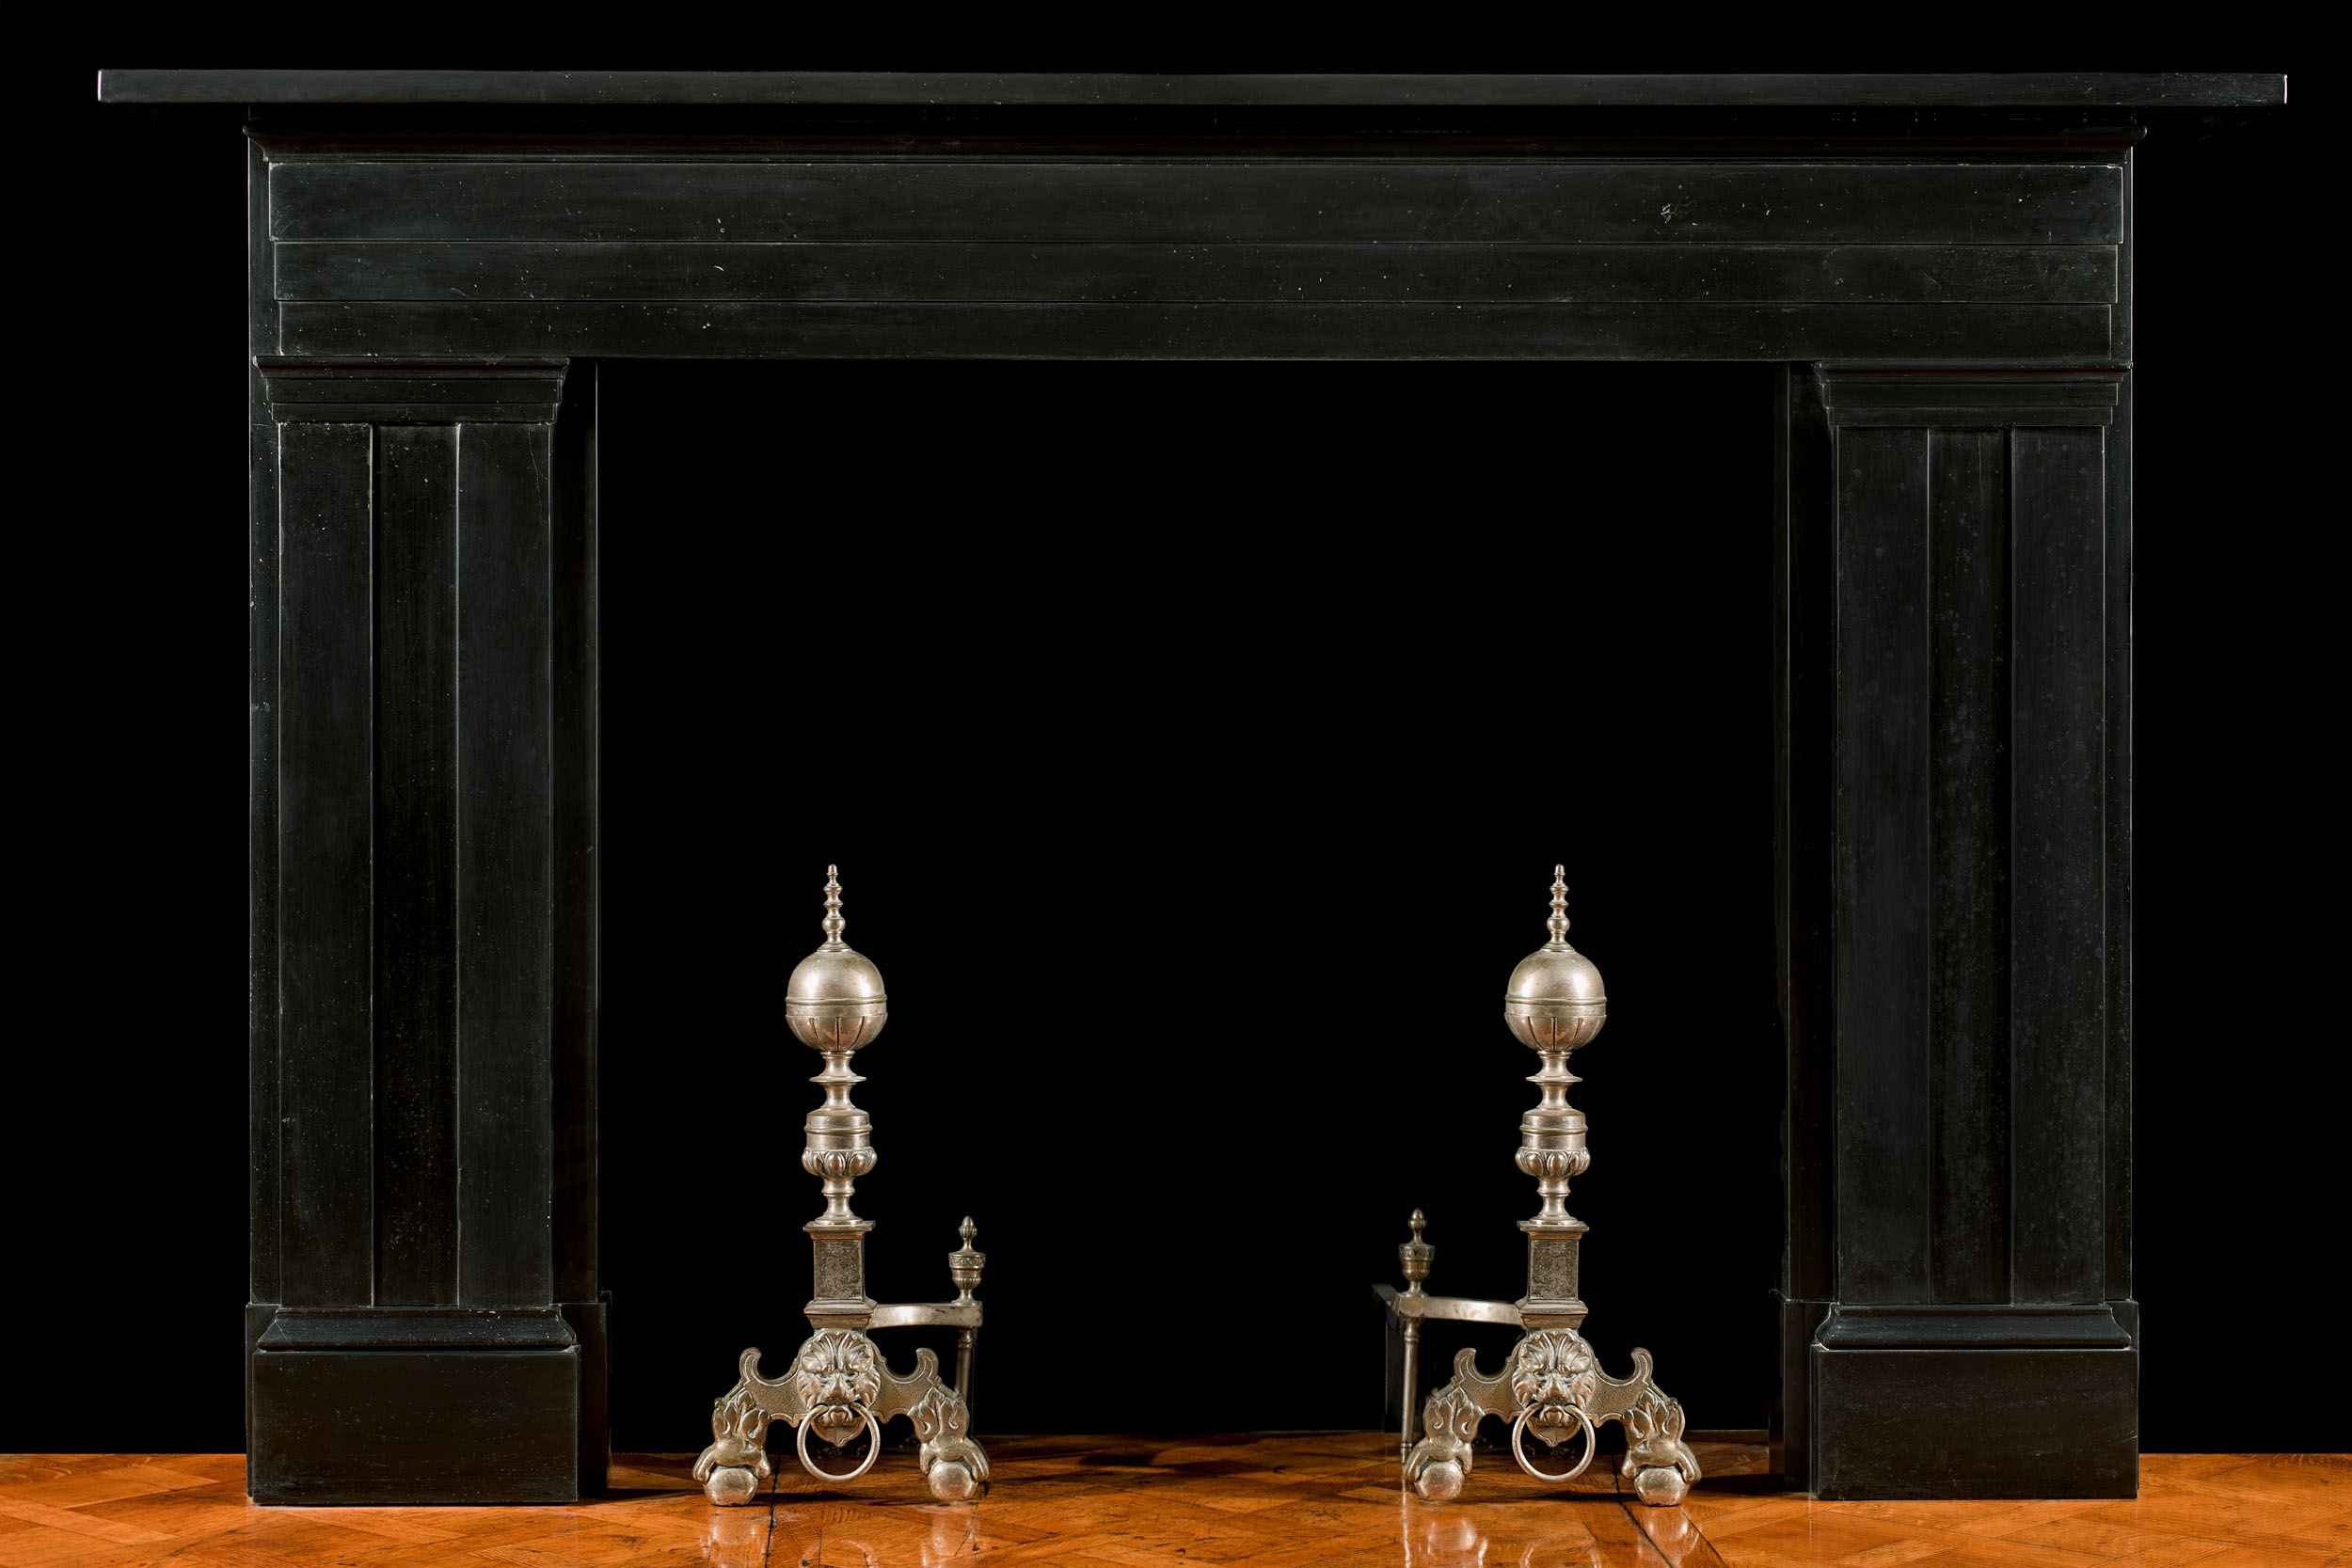  An antique Williams IV style fireplace mantel   